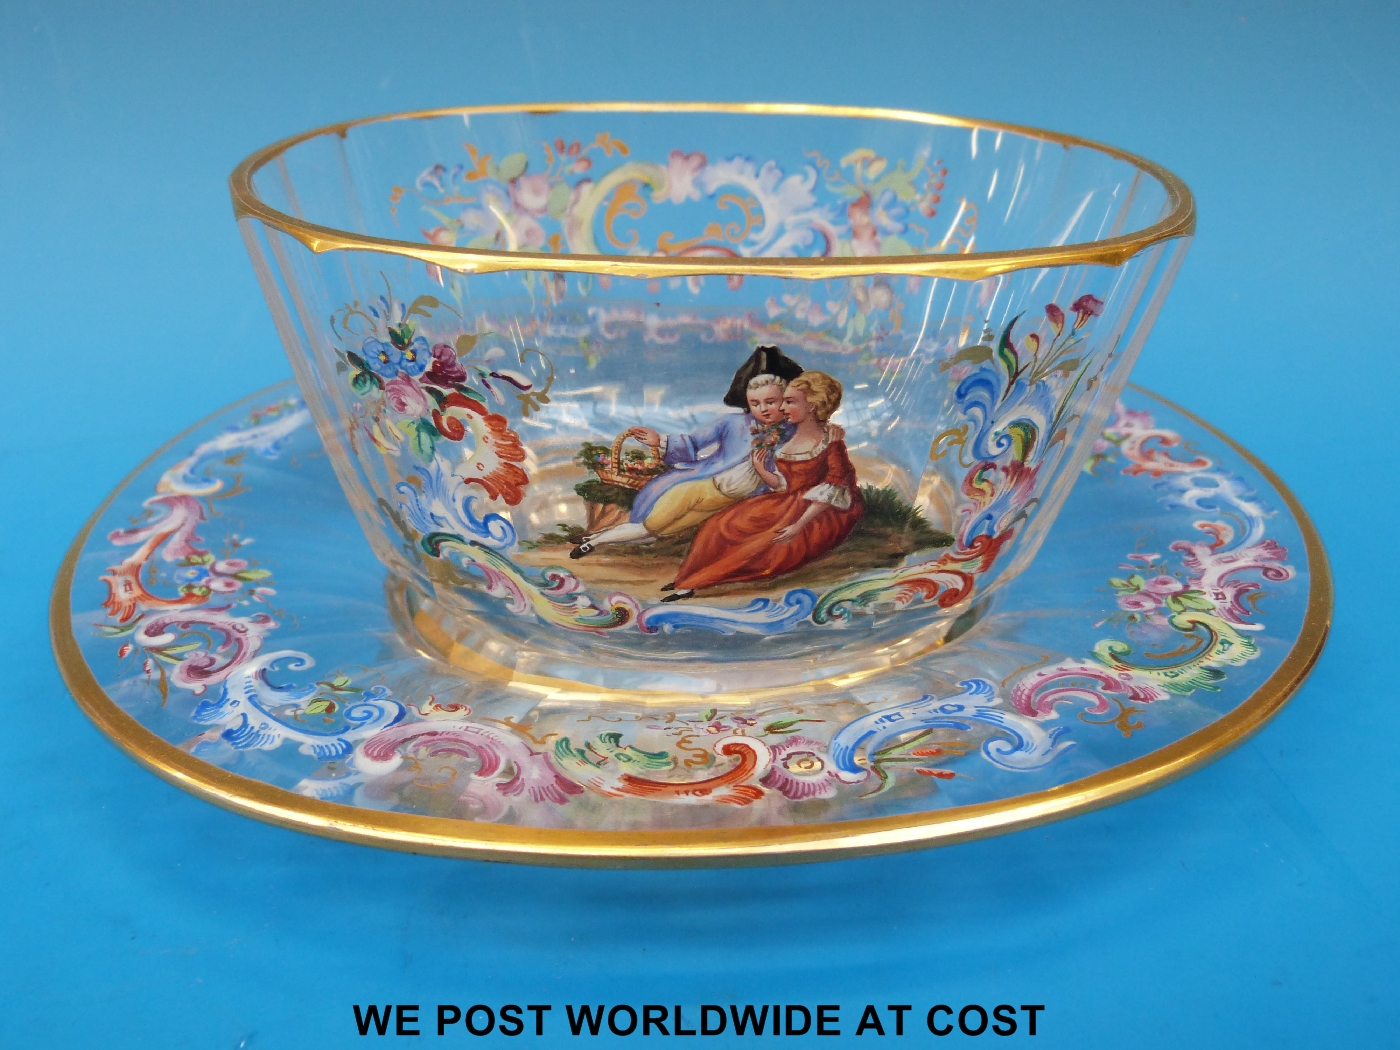 A Lobmeyr cut glass and enamelled bowl and matching plate with a hand painted scene of a young